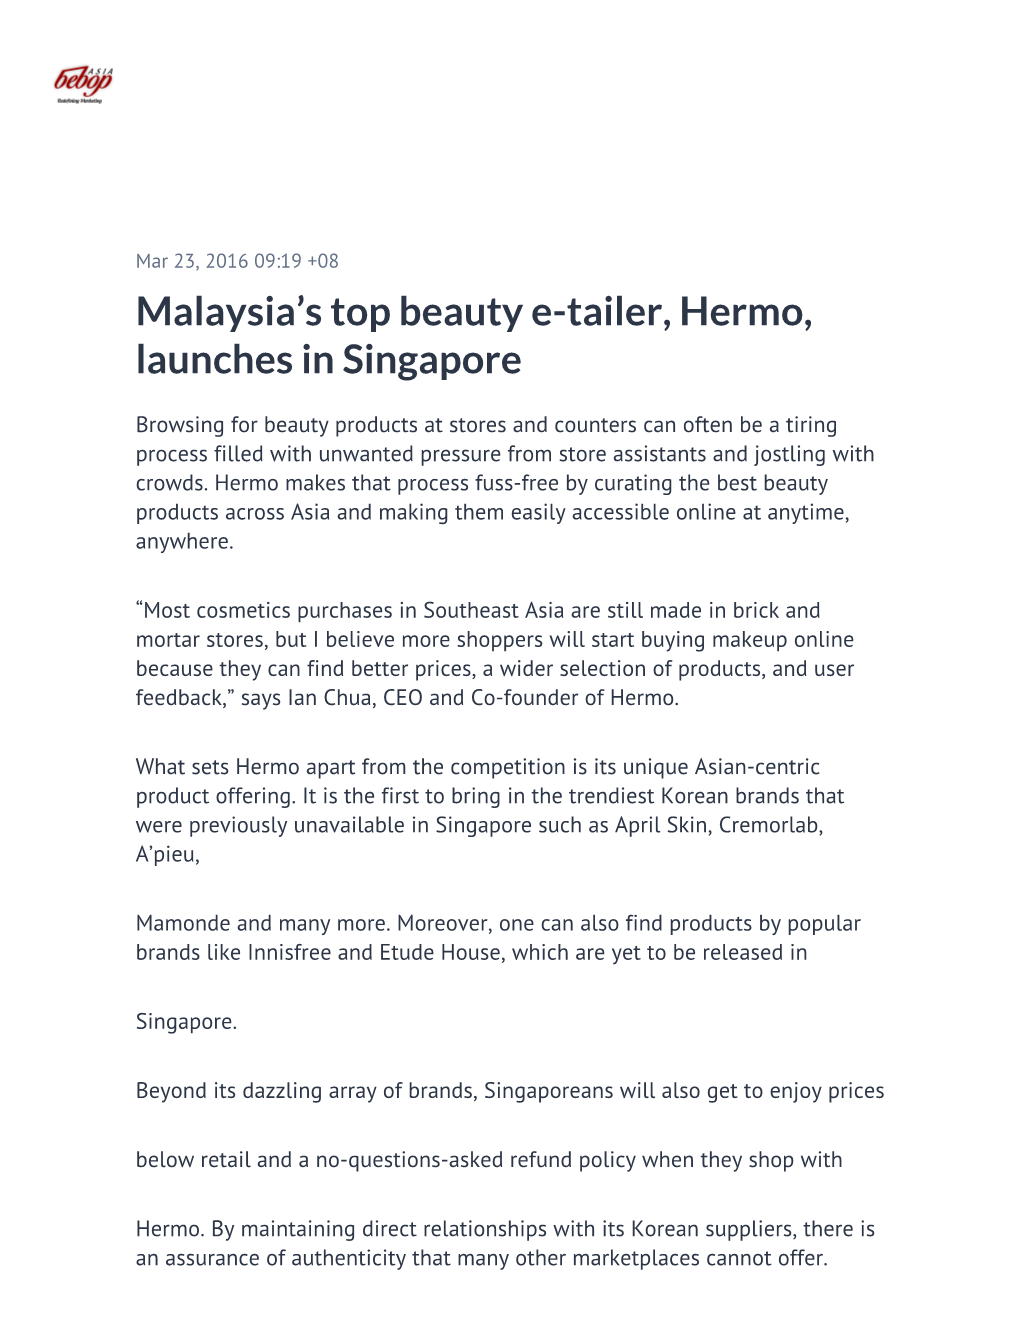 Malaysia's Top Beauty E-Tailer, Hermo, Launches in Singapore